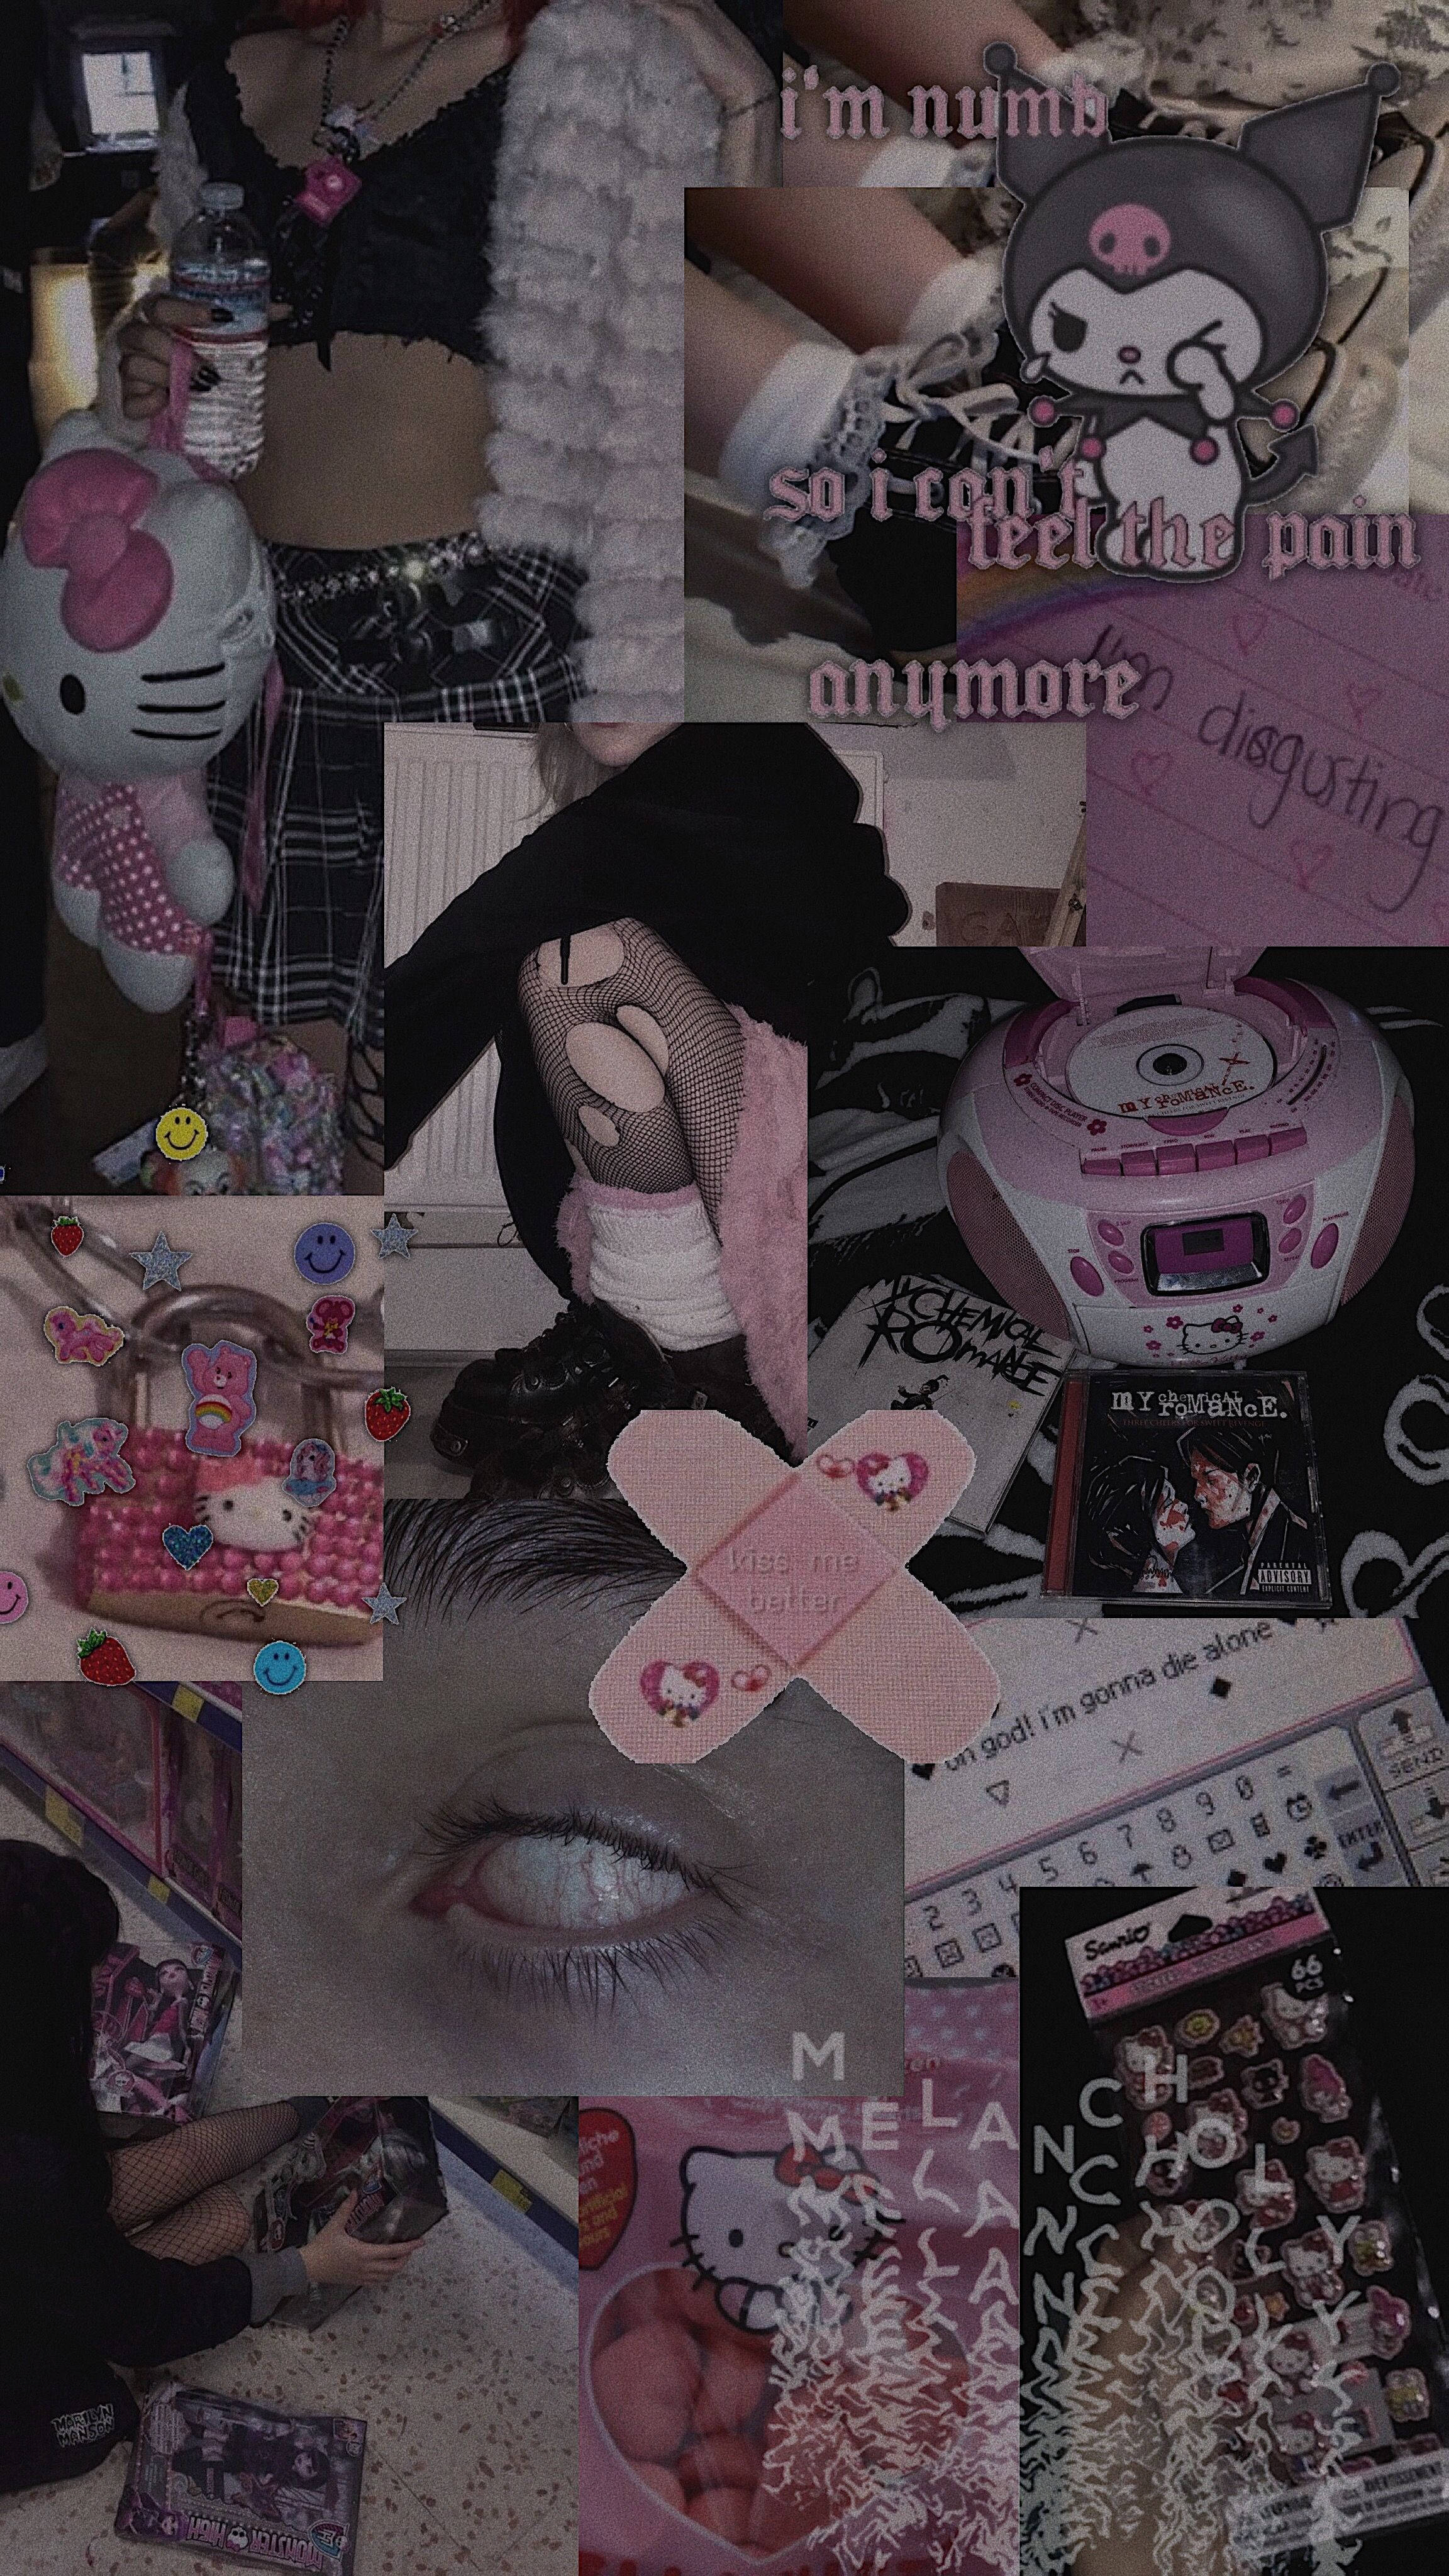 Download Muted Pink And Black E-girl Aesthetic Wallpaper | Wallpapers.com